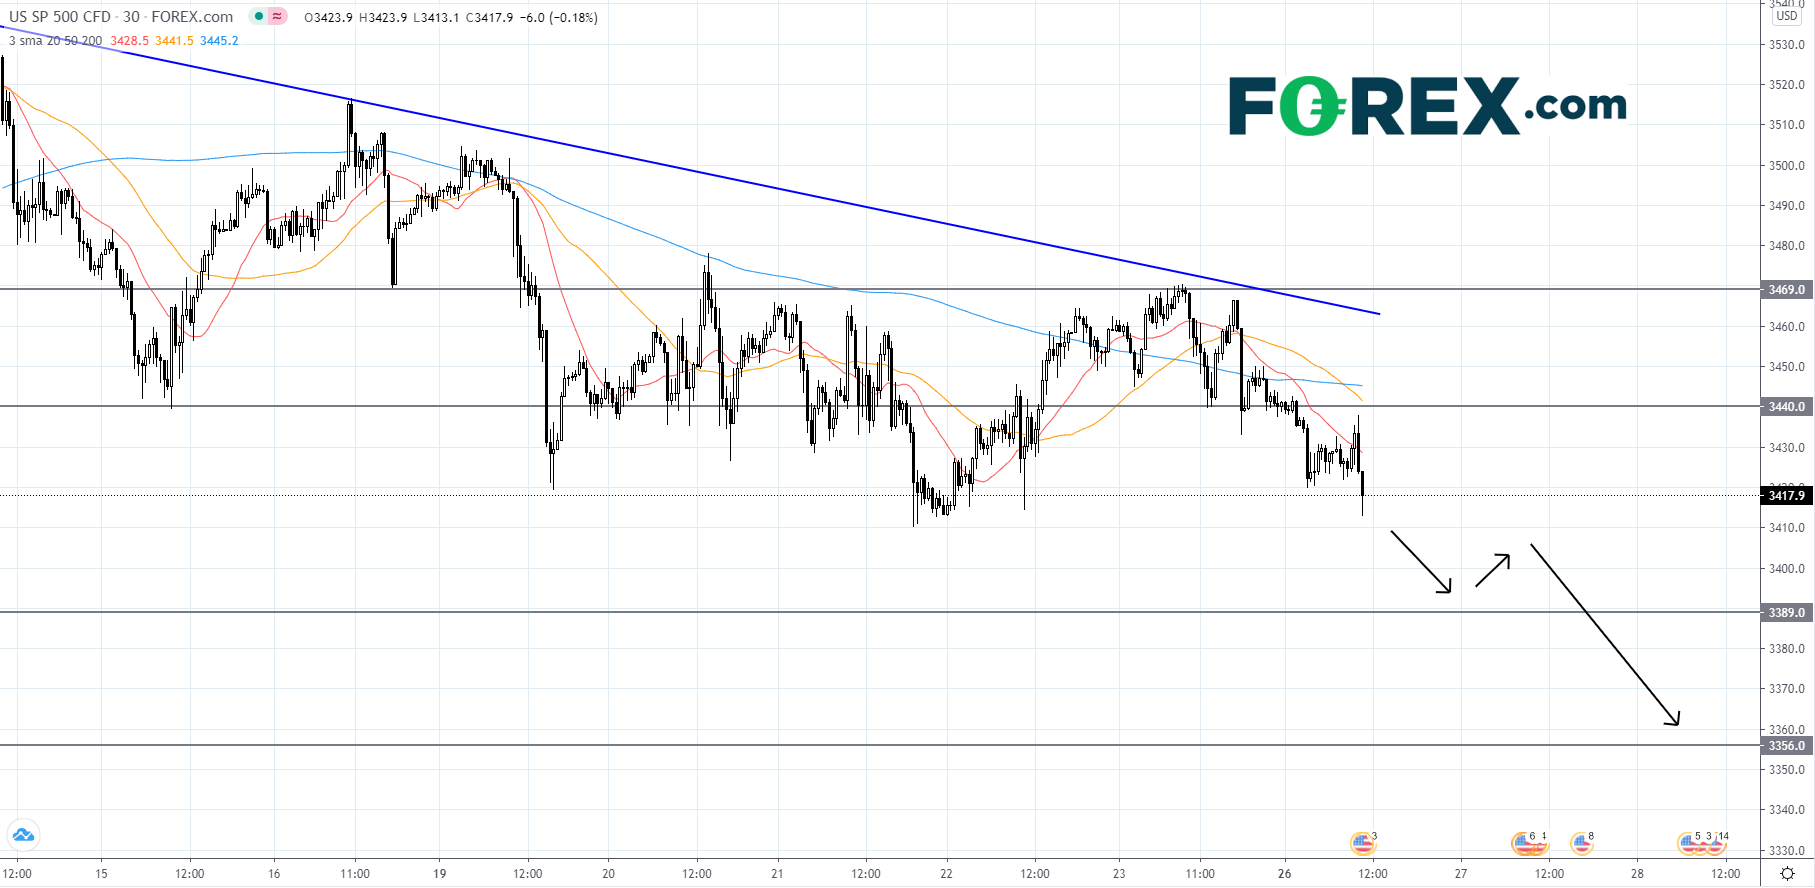 Market chart demonstrating The Sp 500 Is Under Pressure. Published in October 2020 by FOREX.com